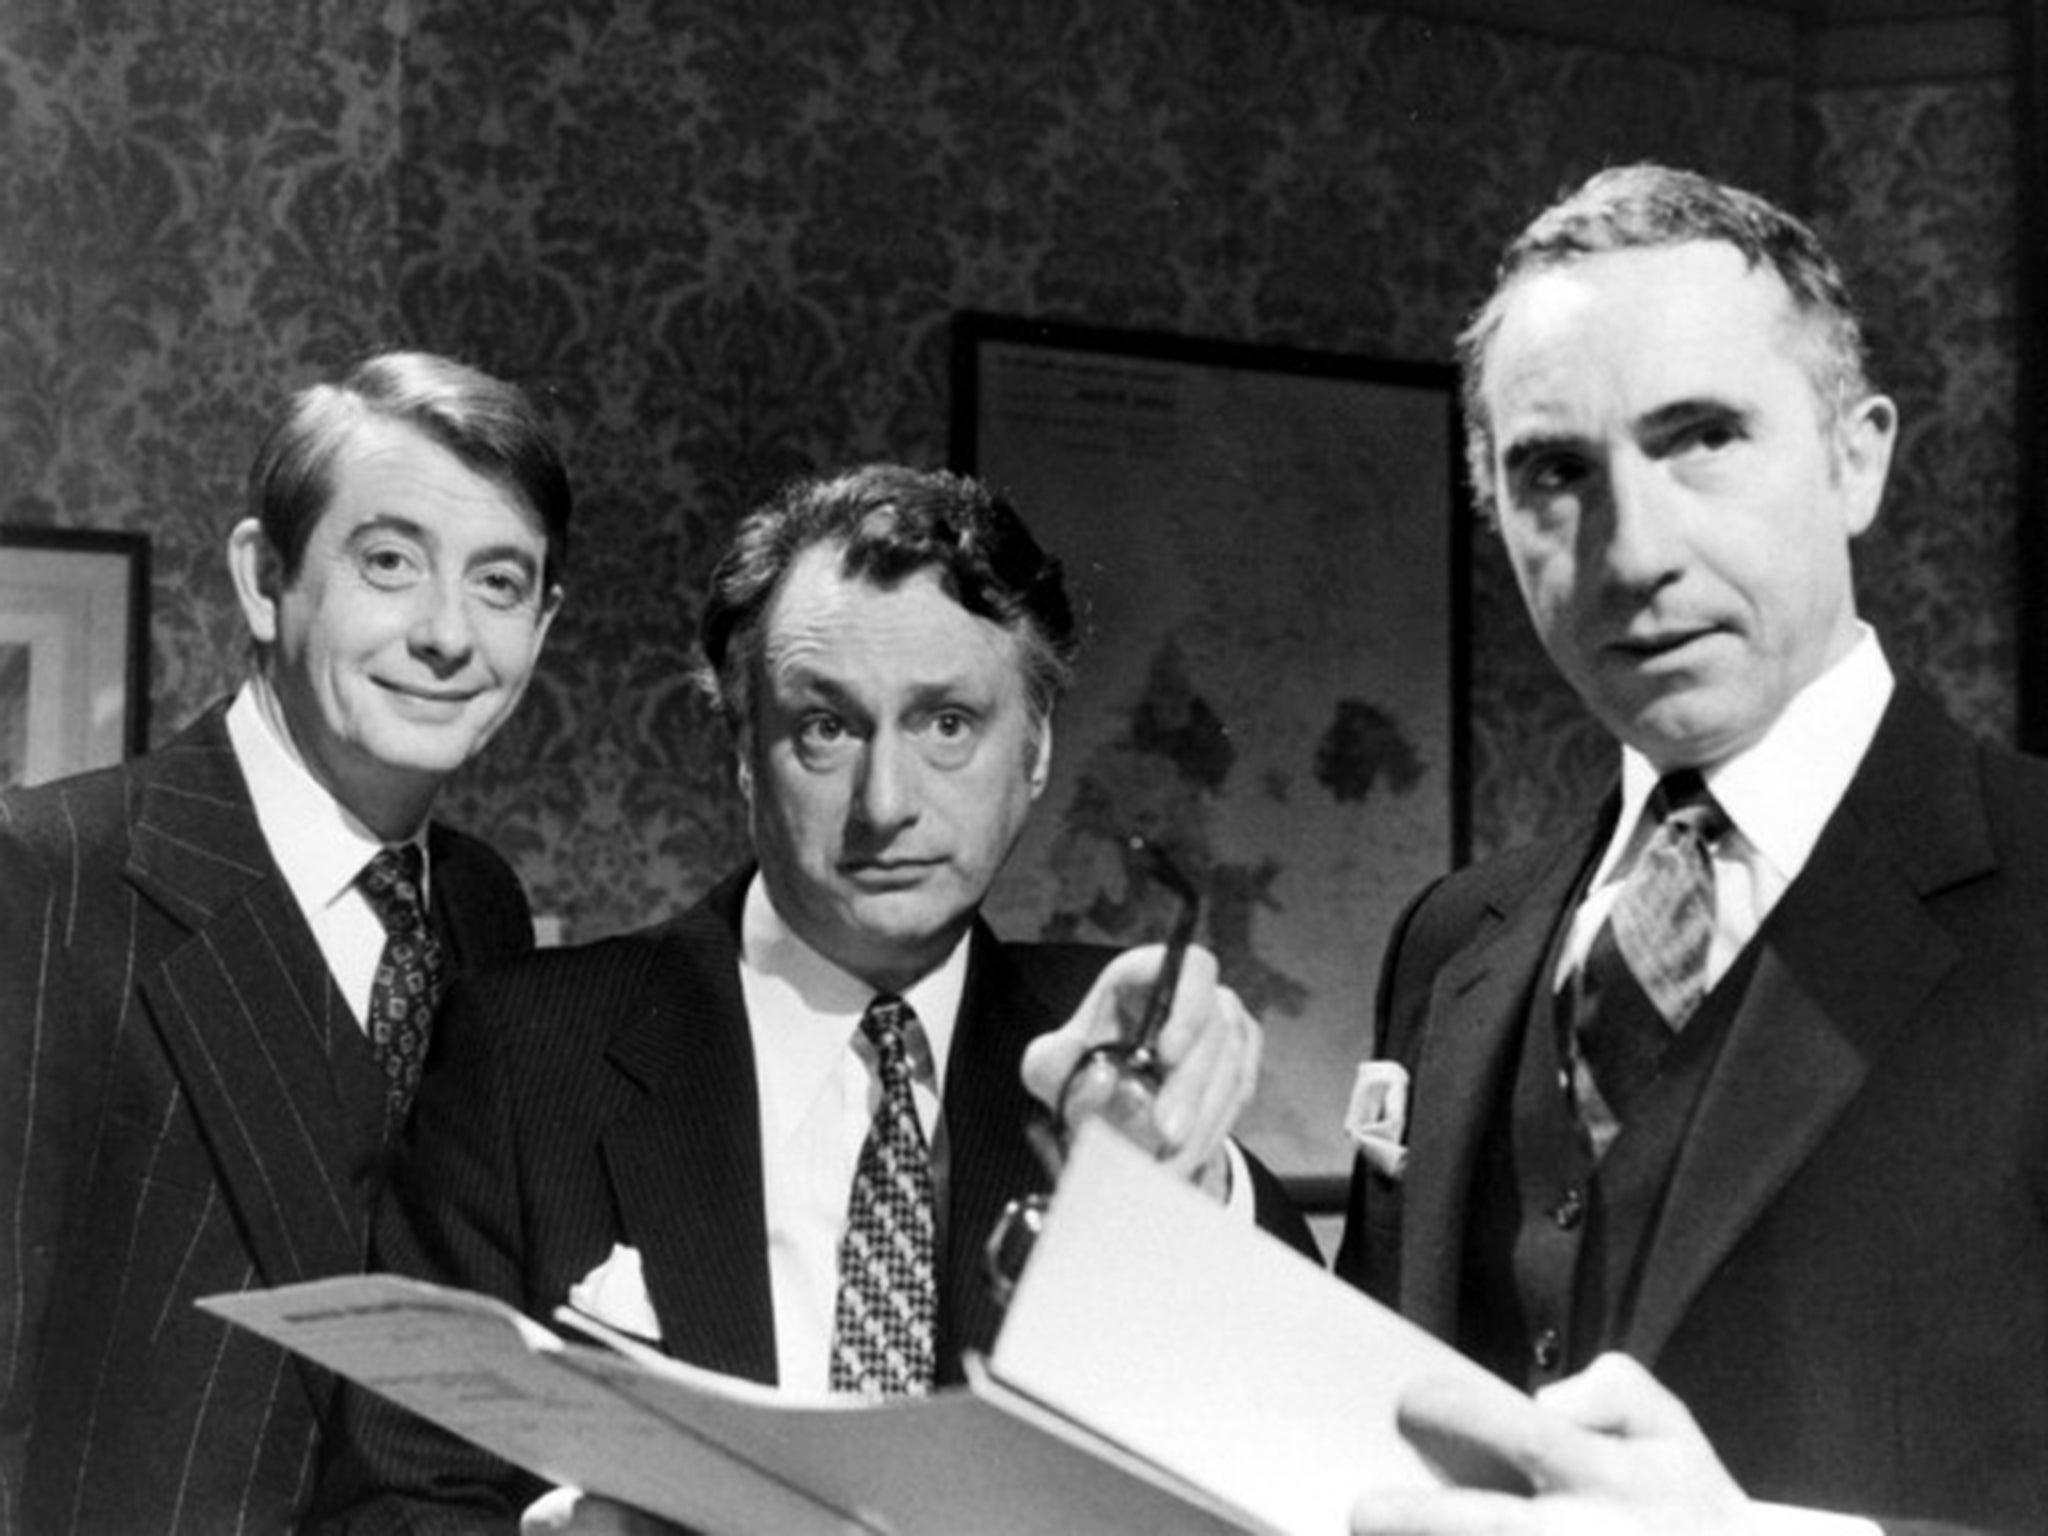 There have been calls for an end to the sort of Whitehall-speak that was a second language to the characters in ‘Yes Minister’ 